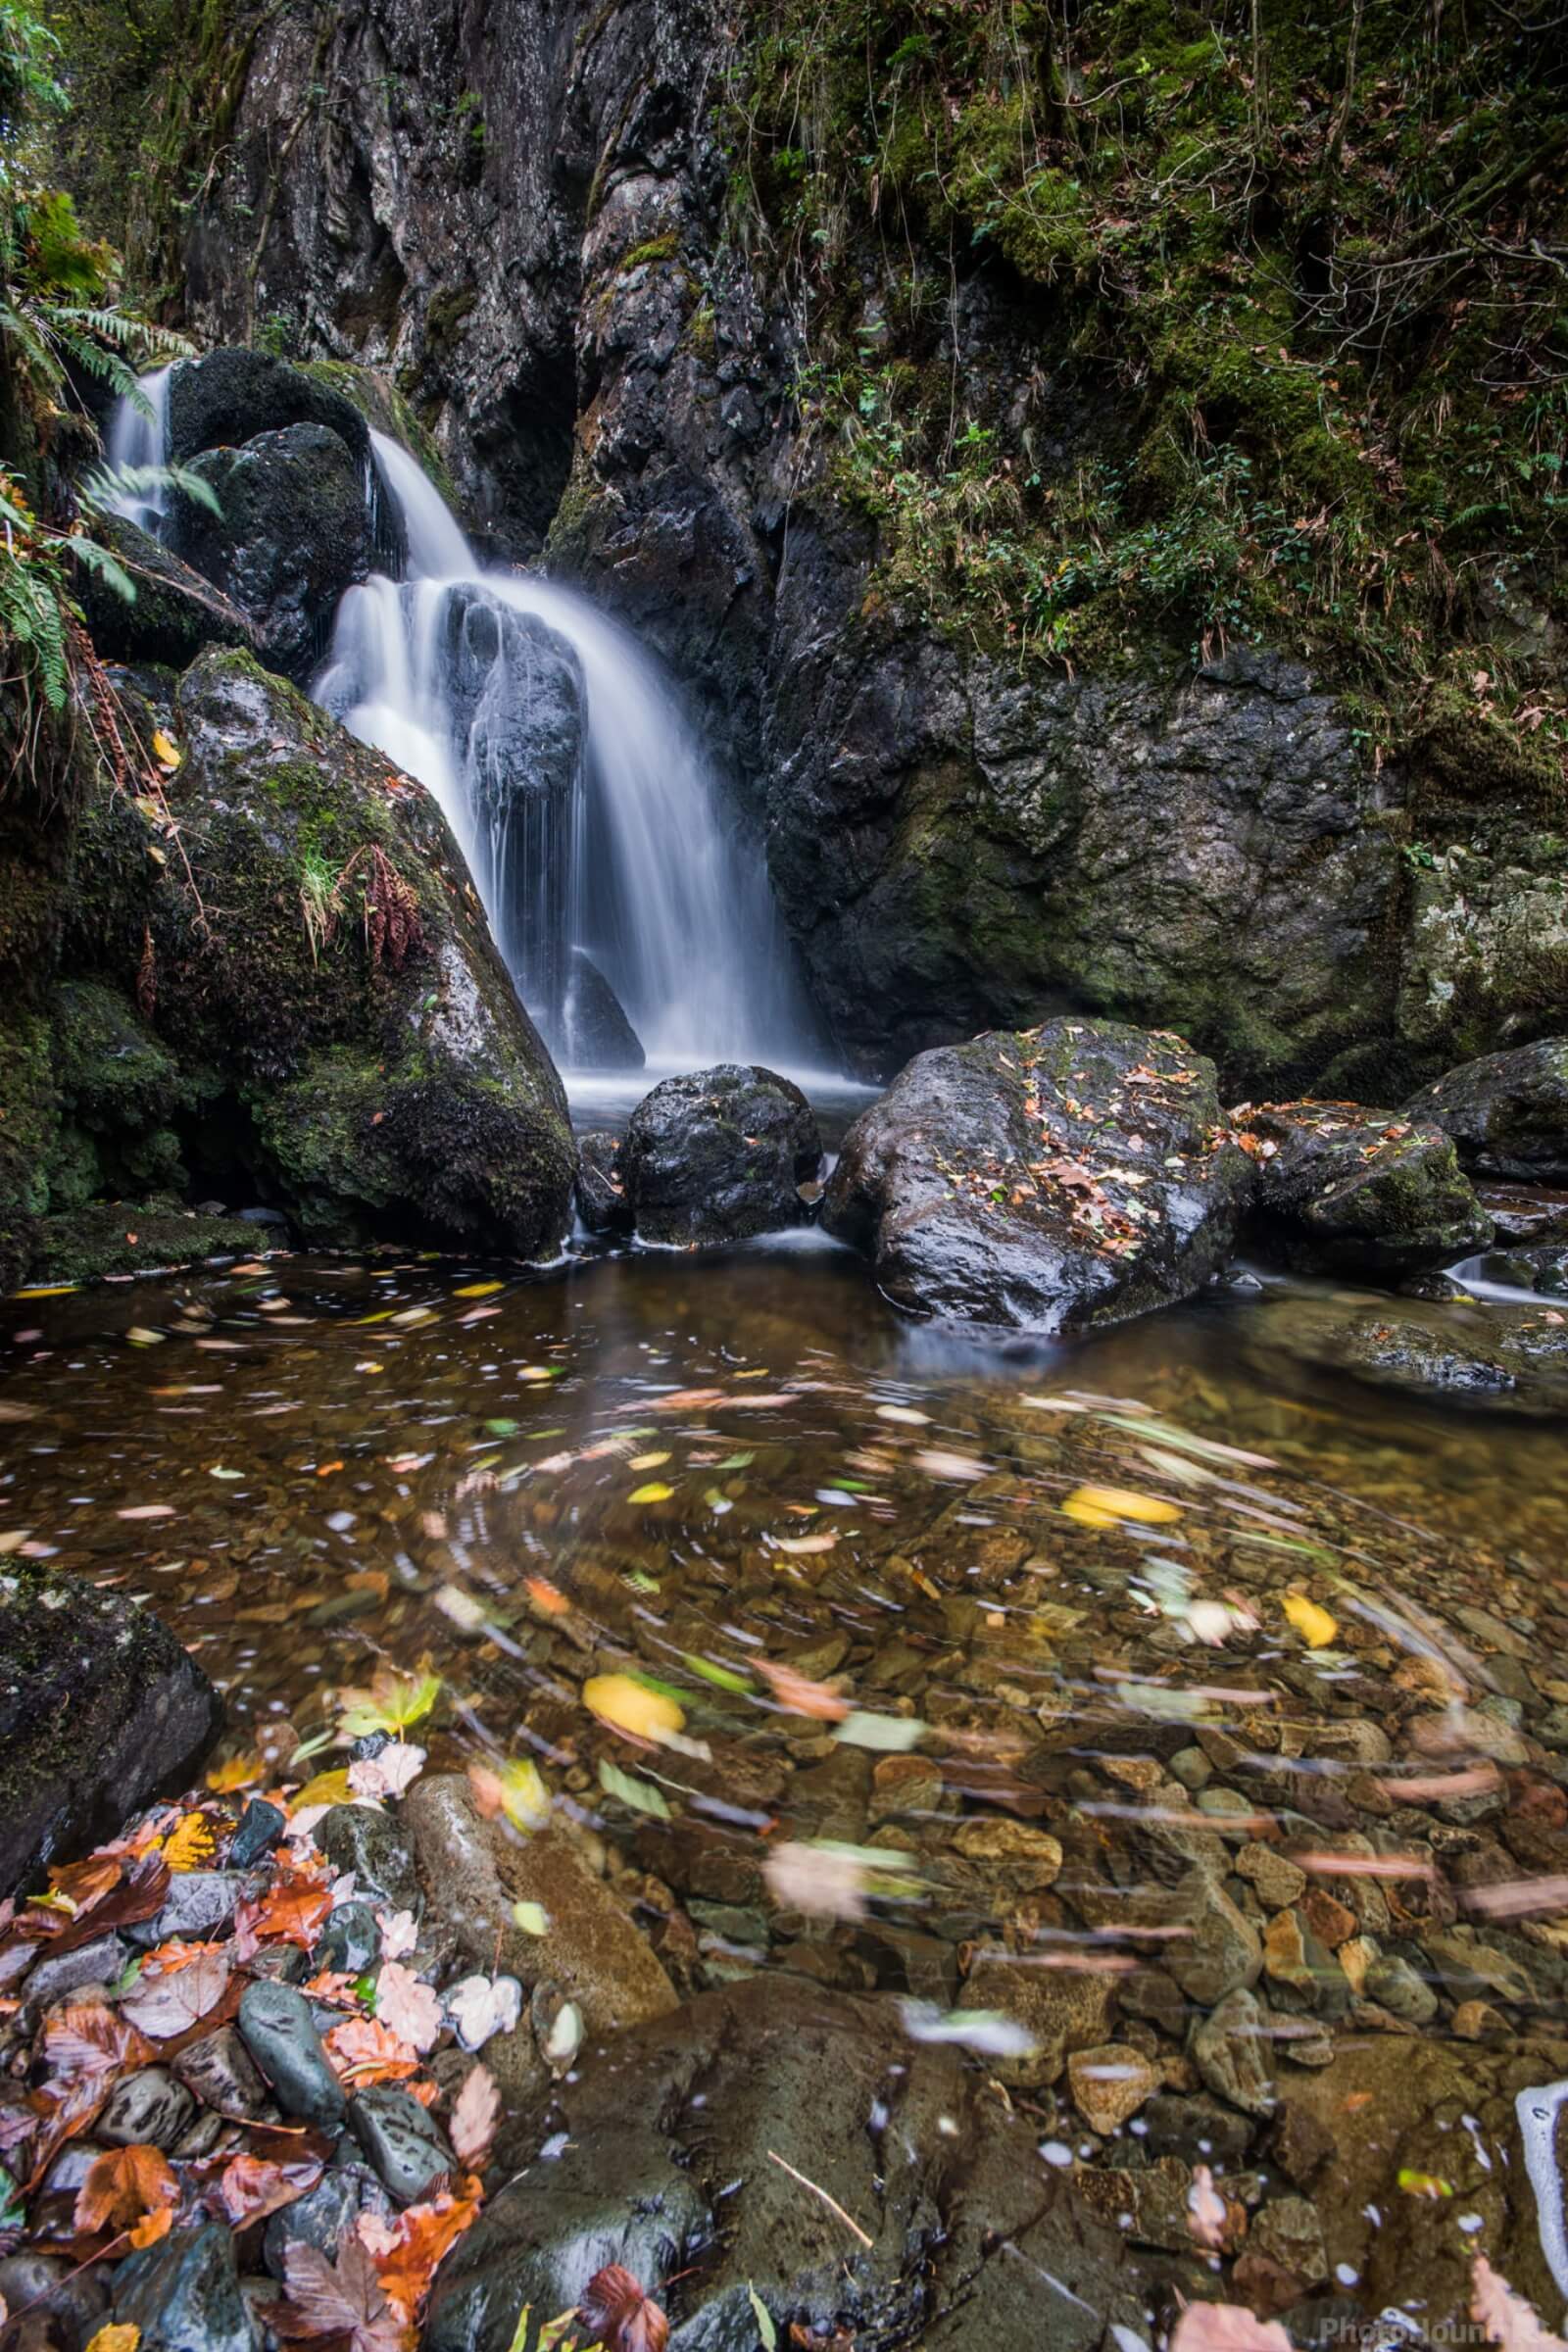 Image of Lodore Falls, Lake District by James Grant